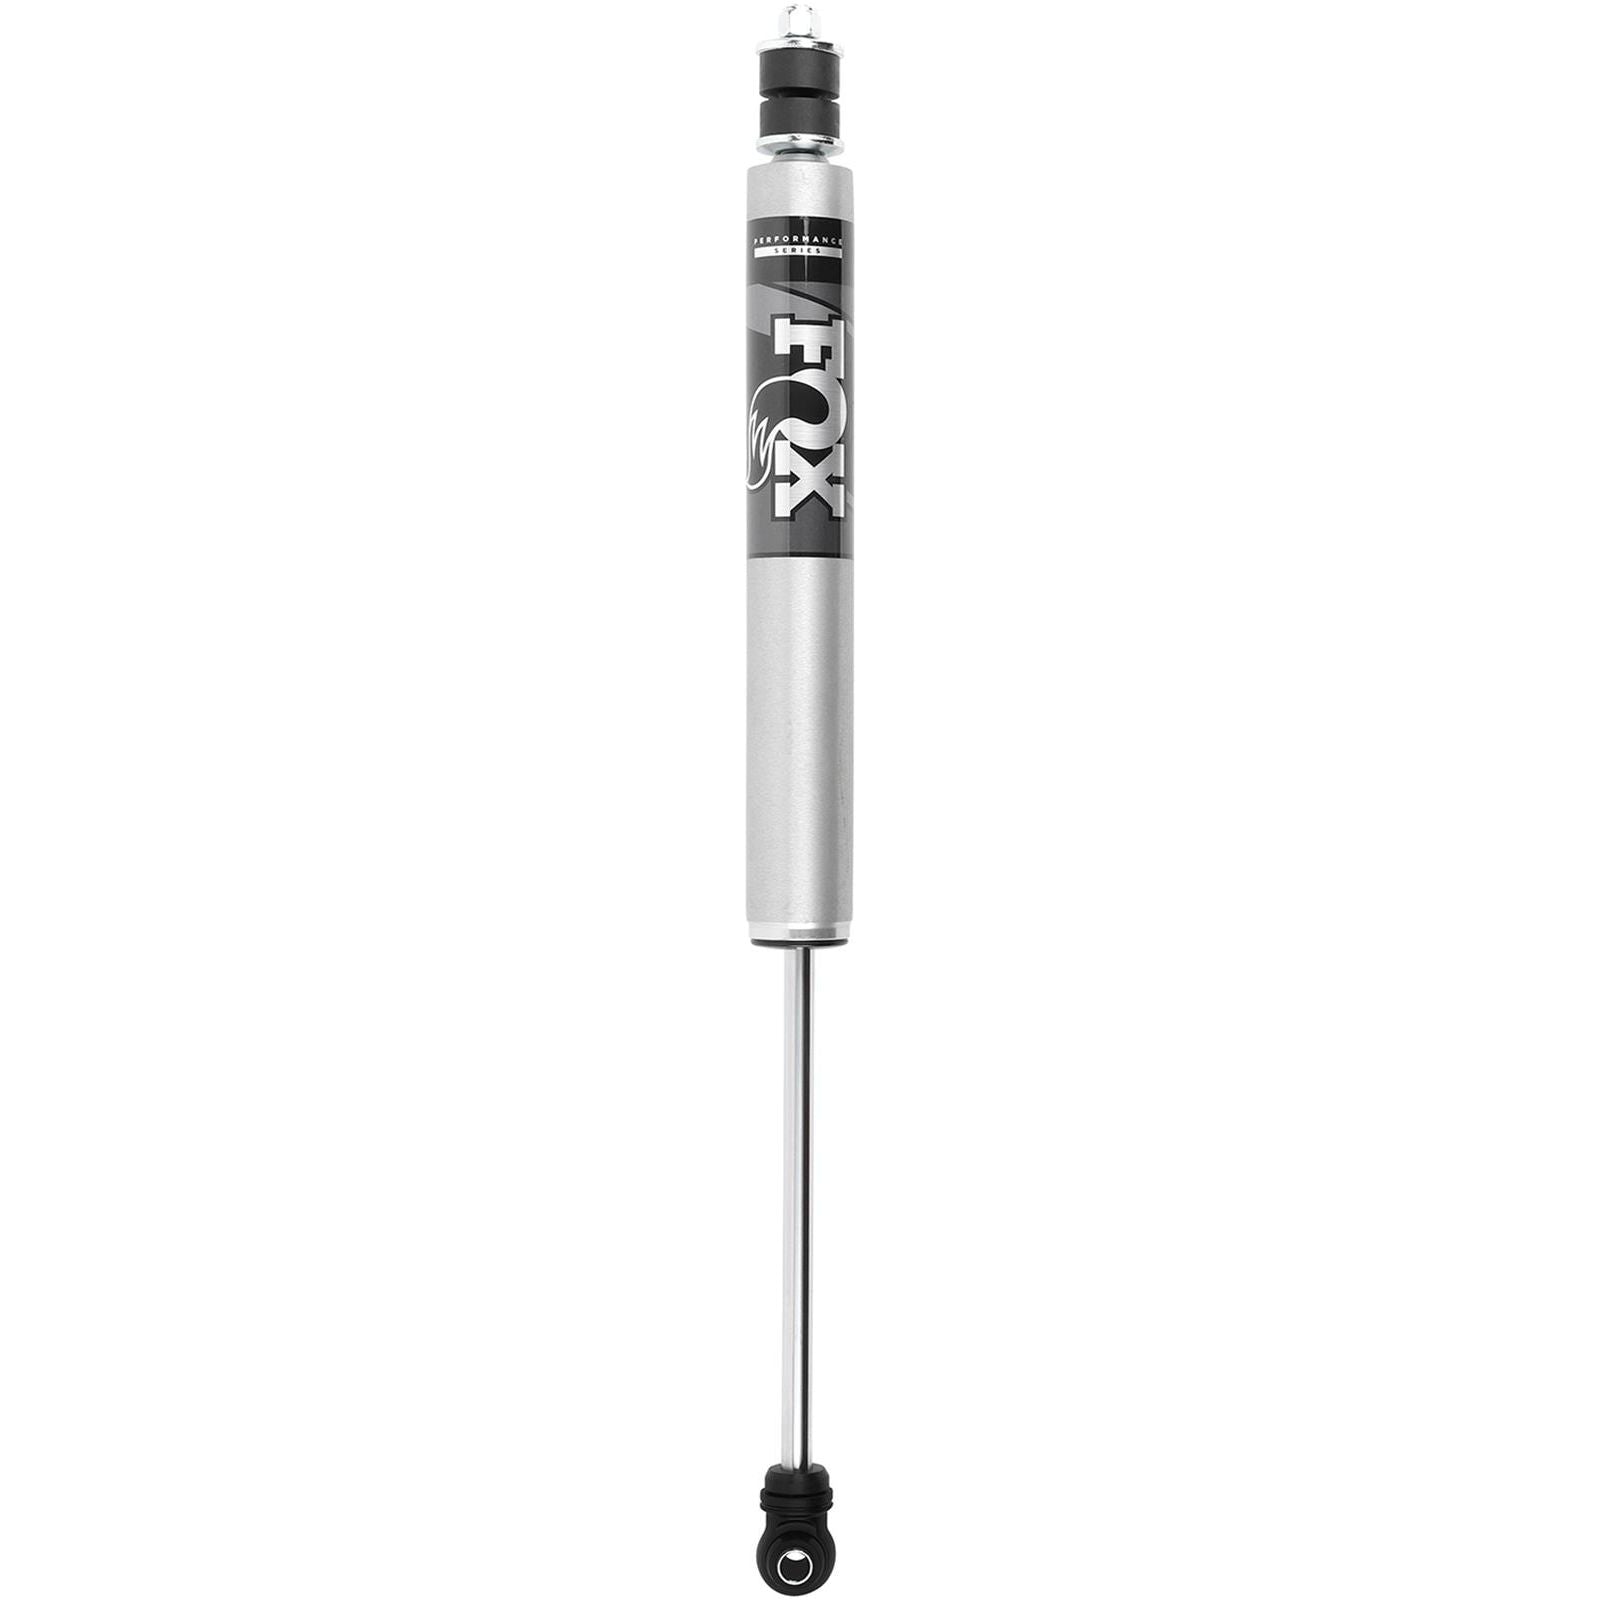 FOX 2.0 Performance IFP Shock for GM 2001-10 - 980-24-658